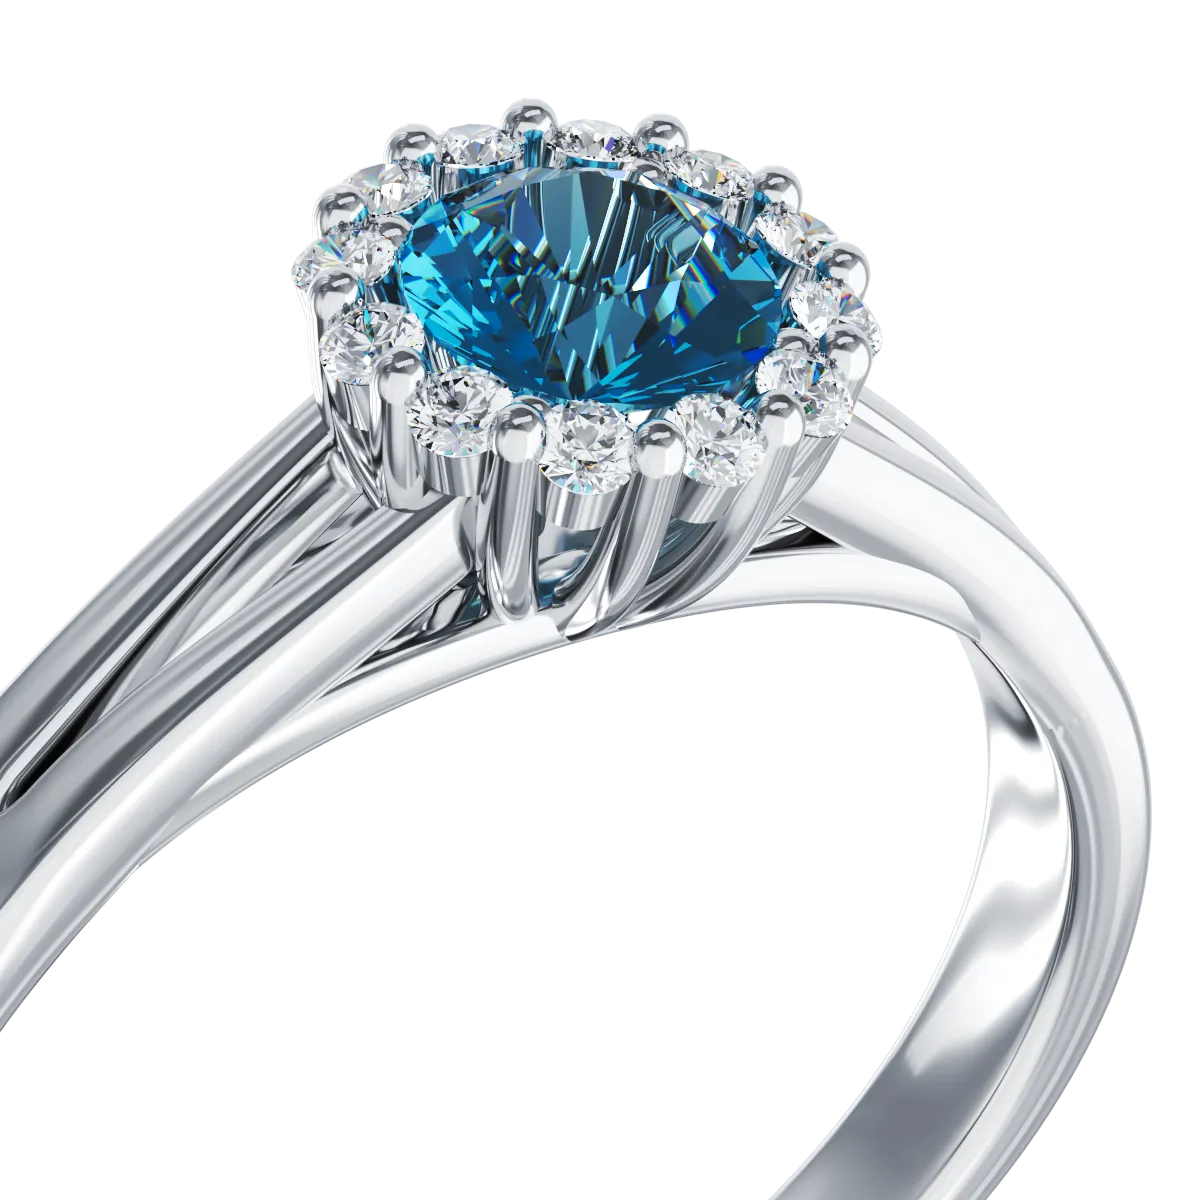 18K white gold engagement ring with blue diamond of 0.33ct and diamonds of 0.1ct